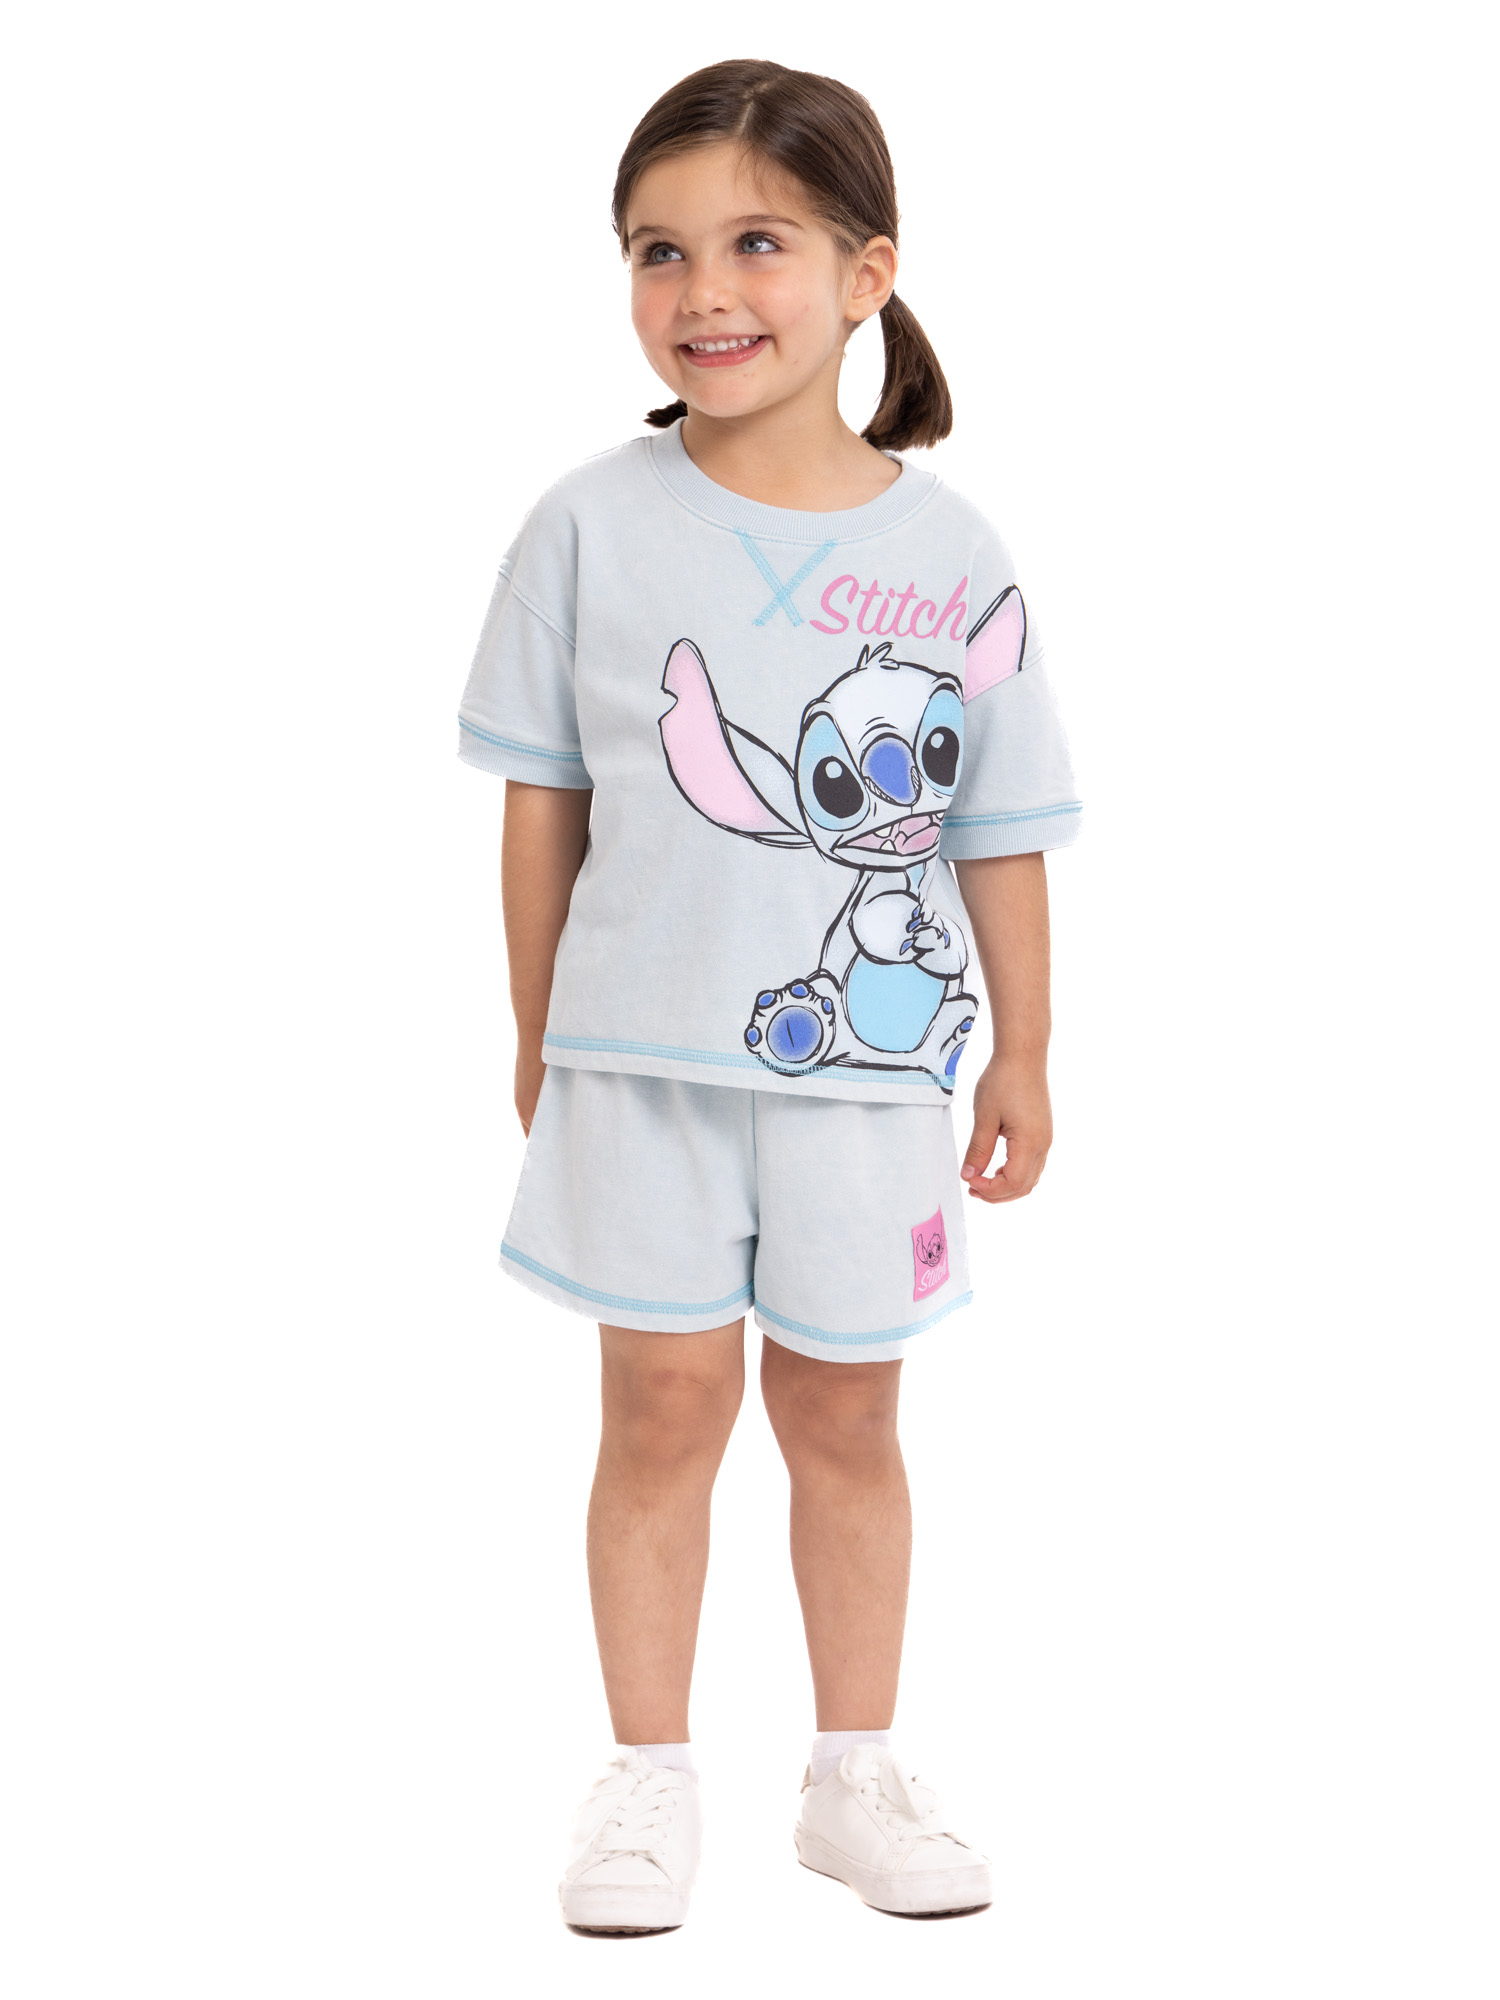 Lilo & Stitch Toddler Girls Tee and Shorts Set, 2-Piece, Sizes 12M-5T - image 4 of 10